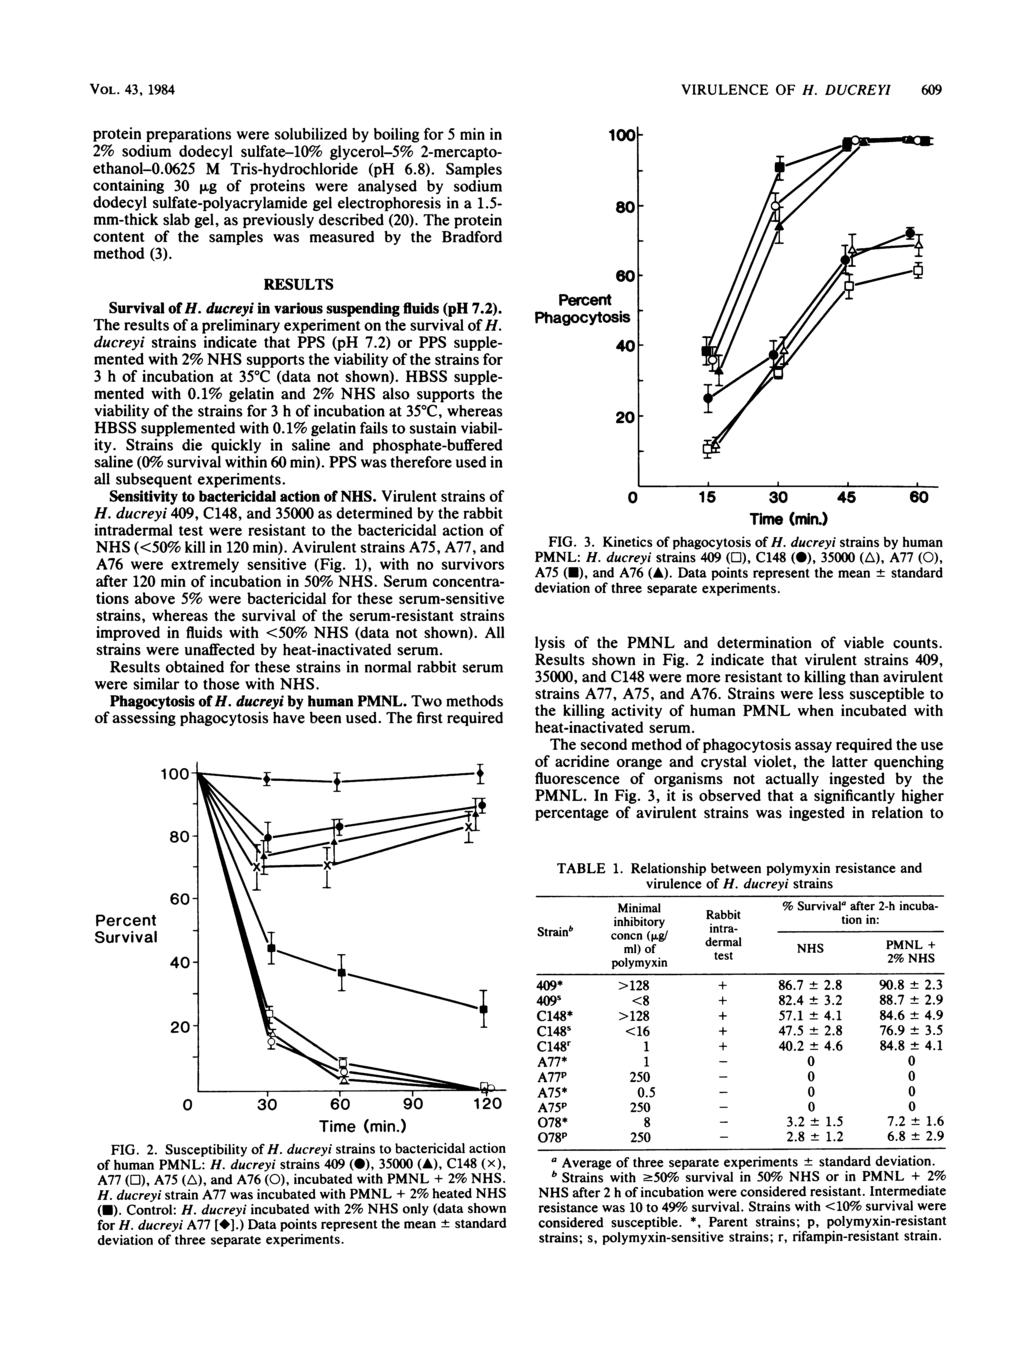 VOL. 43, 1984 protein preparations were solubilized by boiling for 5 min in 2% sodium dodecyl sulfate-10% glycerol-5% 2-mercaptoethanol-0.0625 M Tris-hydrochloride (ph 6.8).